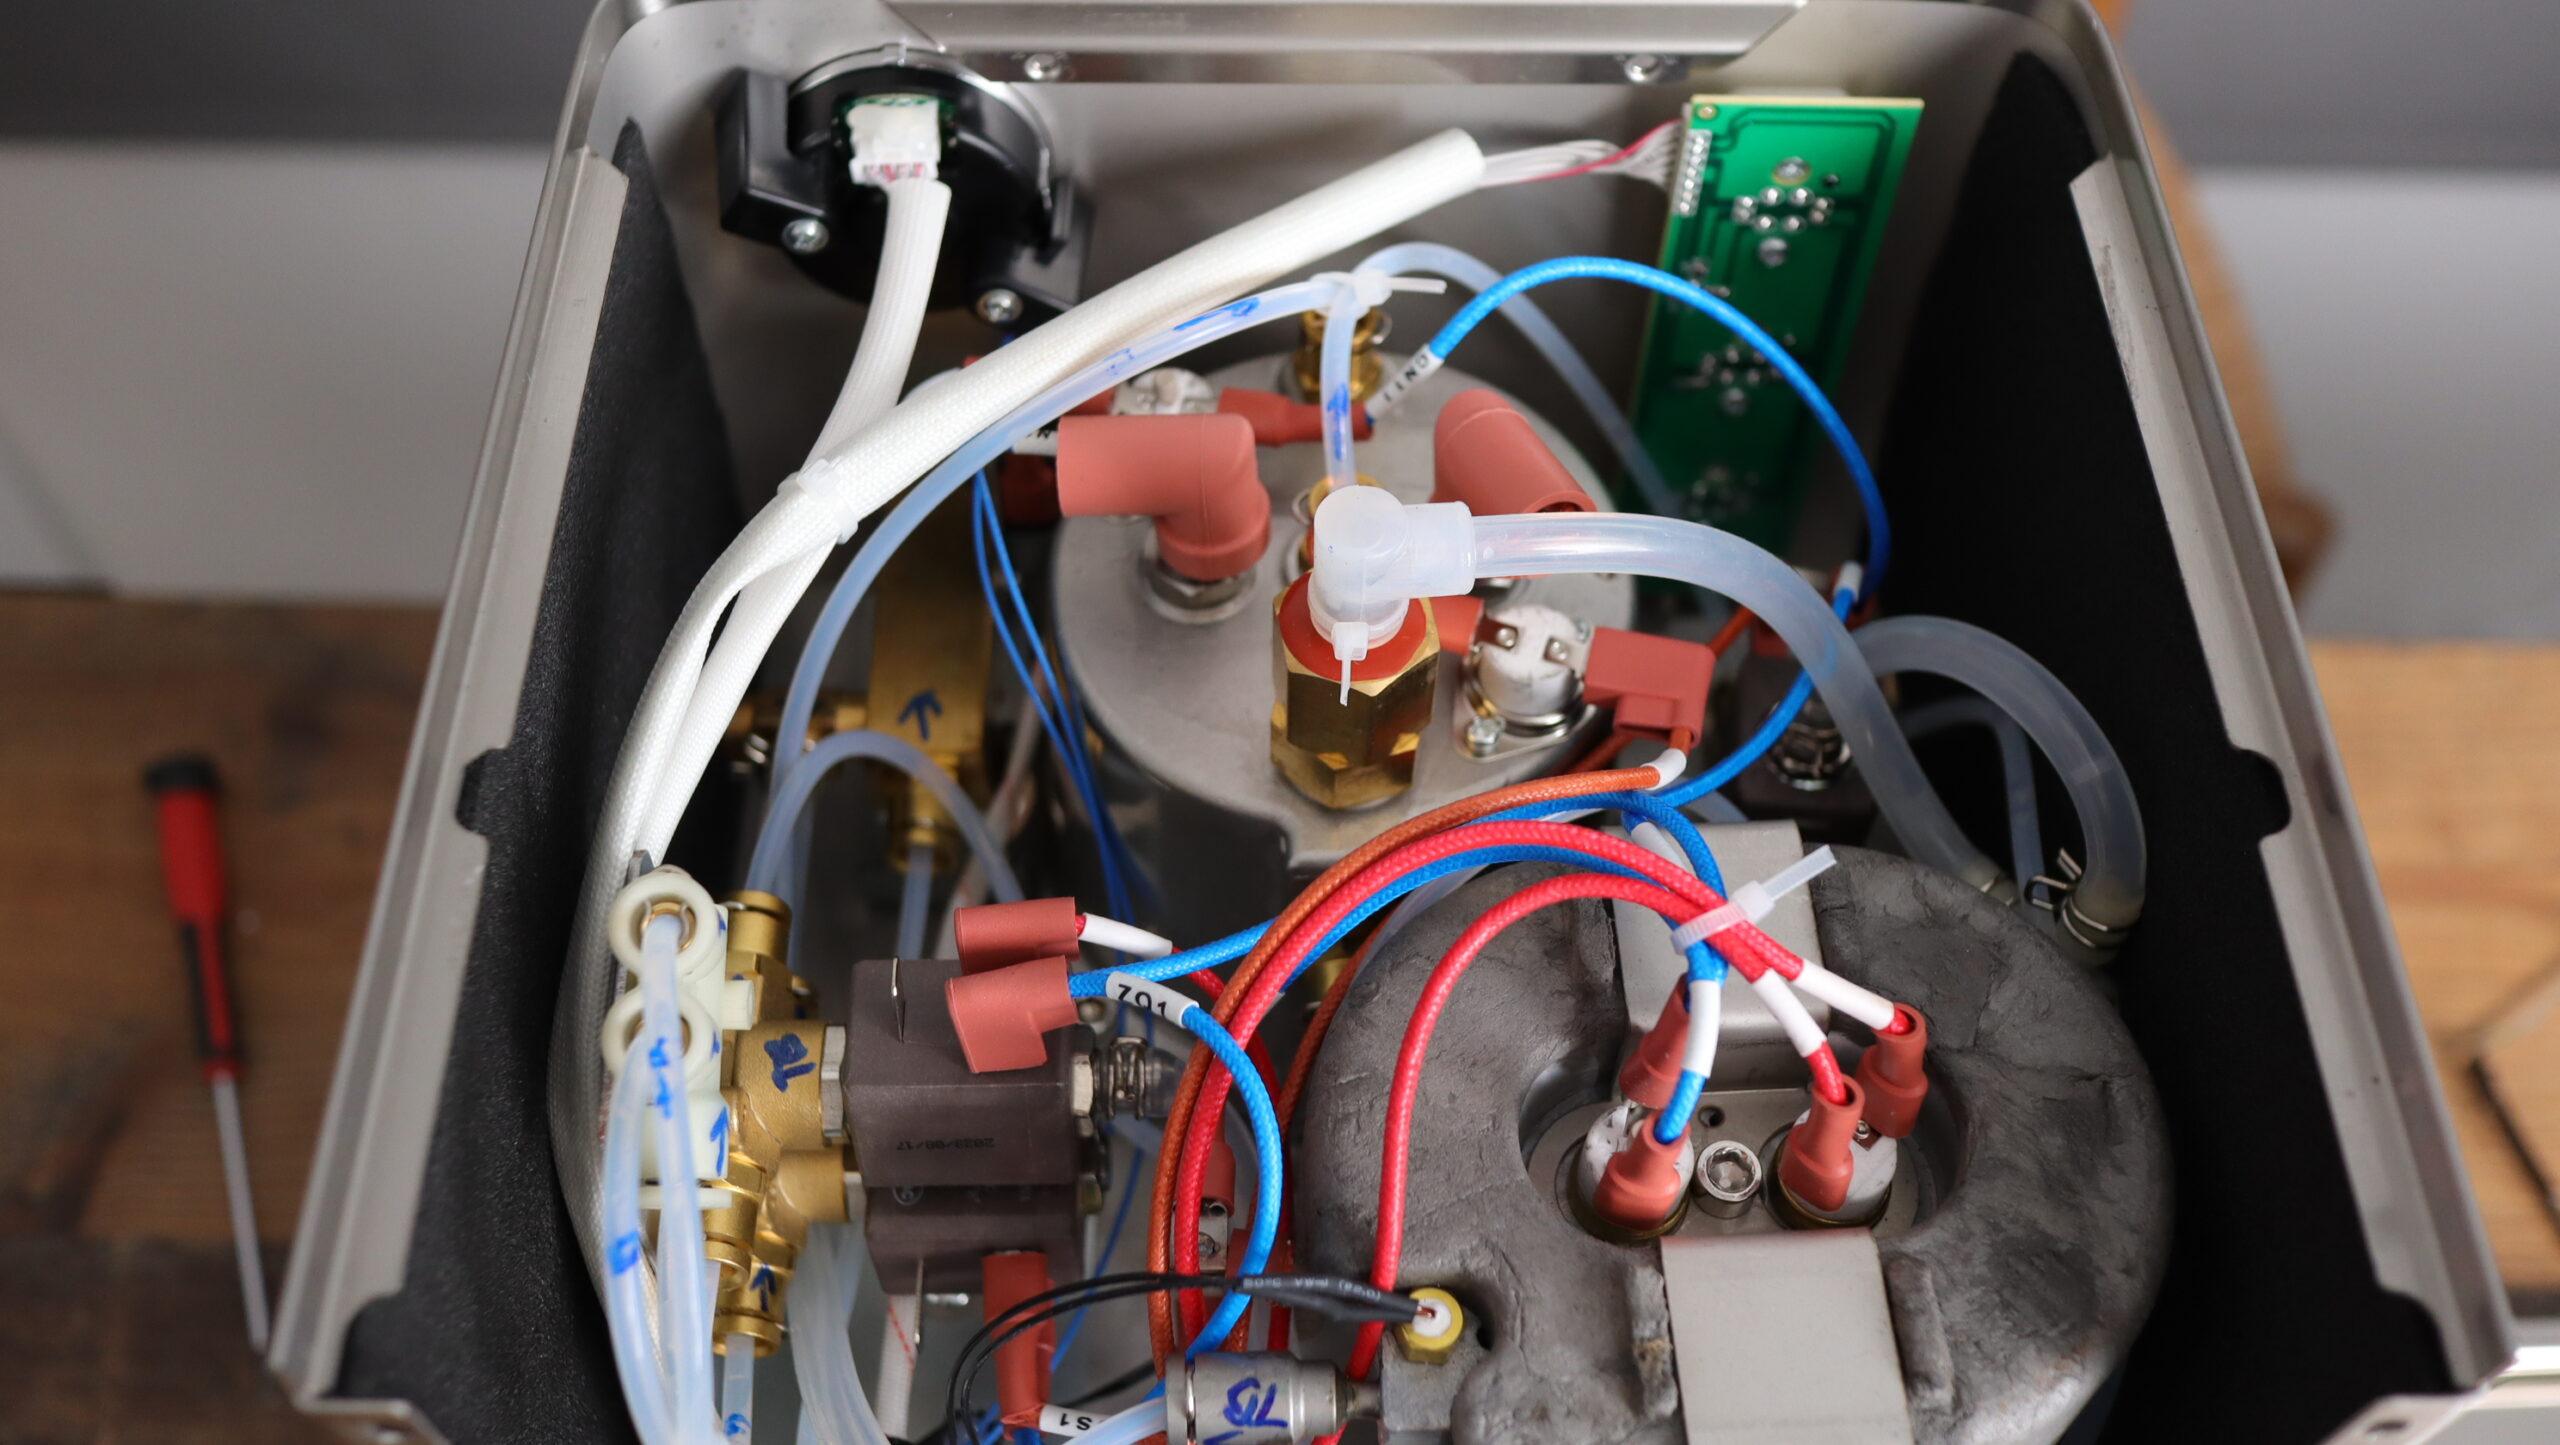 View of the inside of the MiiCoffee Apex, with the stainless steel brew boiler in the background, water circuits on the left, and thermoblock in the foreground